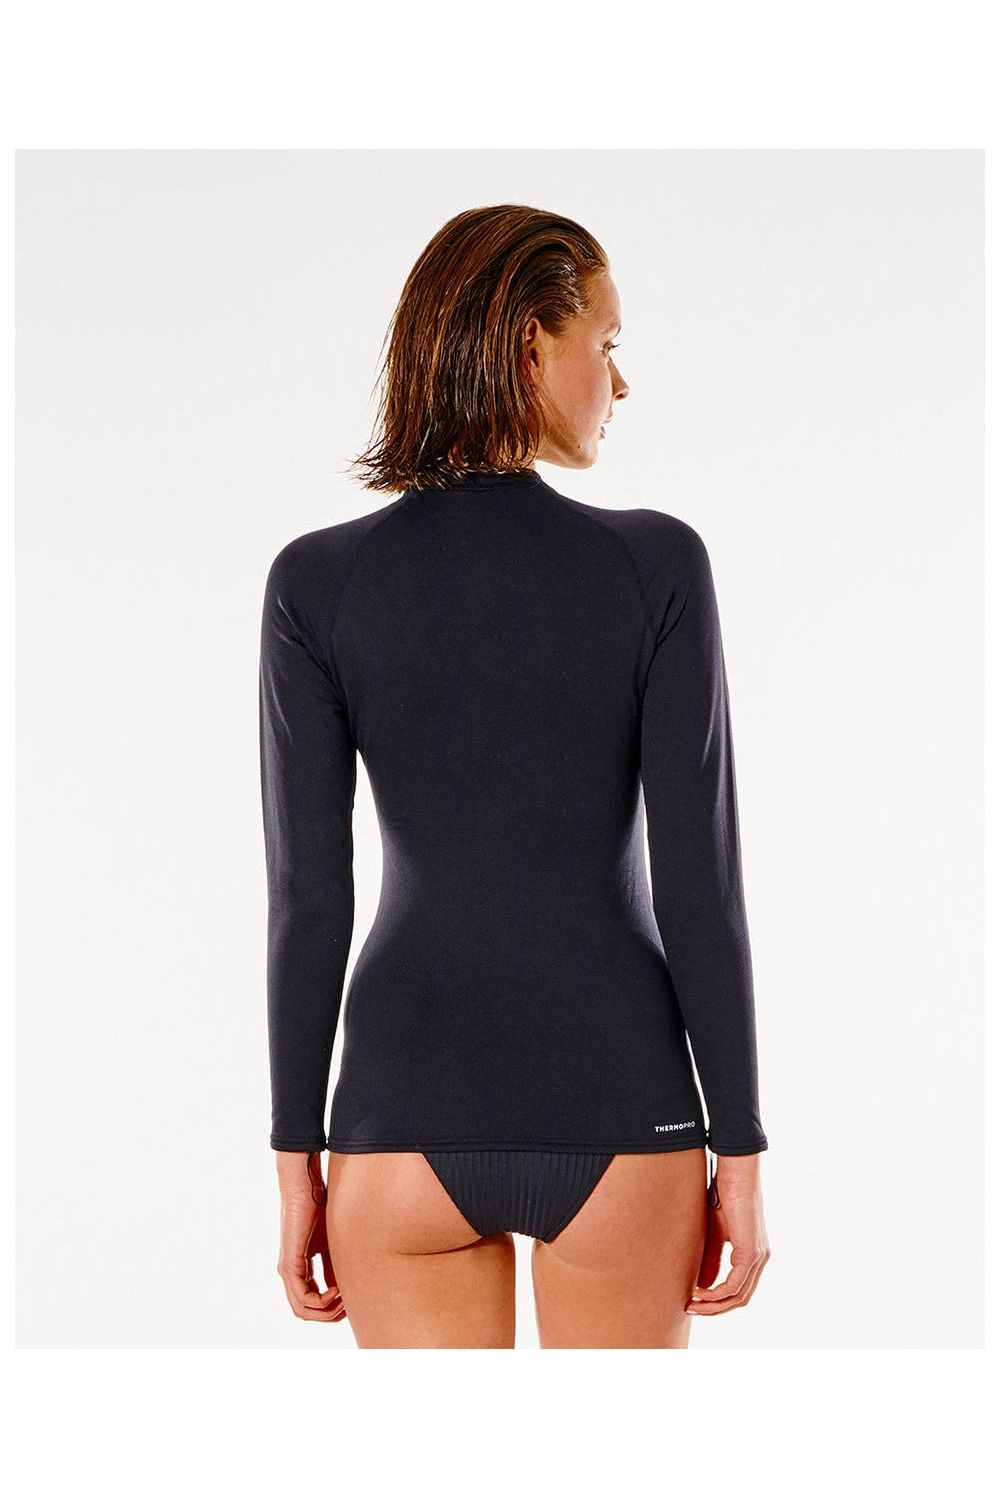 Rip Curl Womens Thermopro Long Sleeve